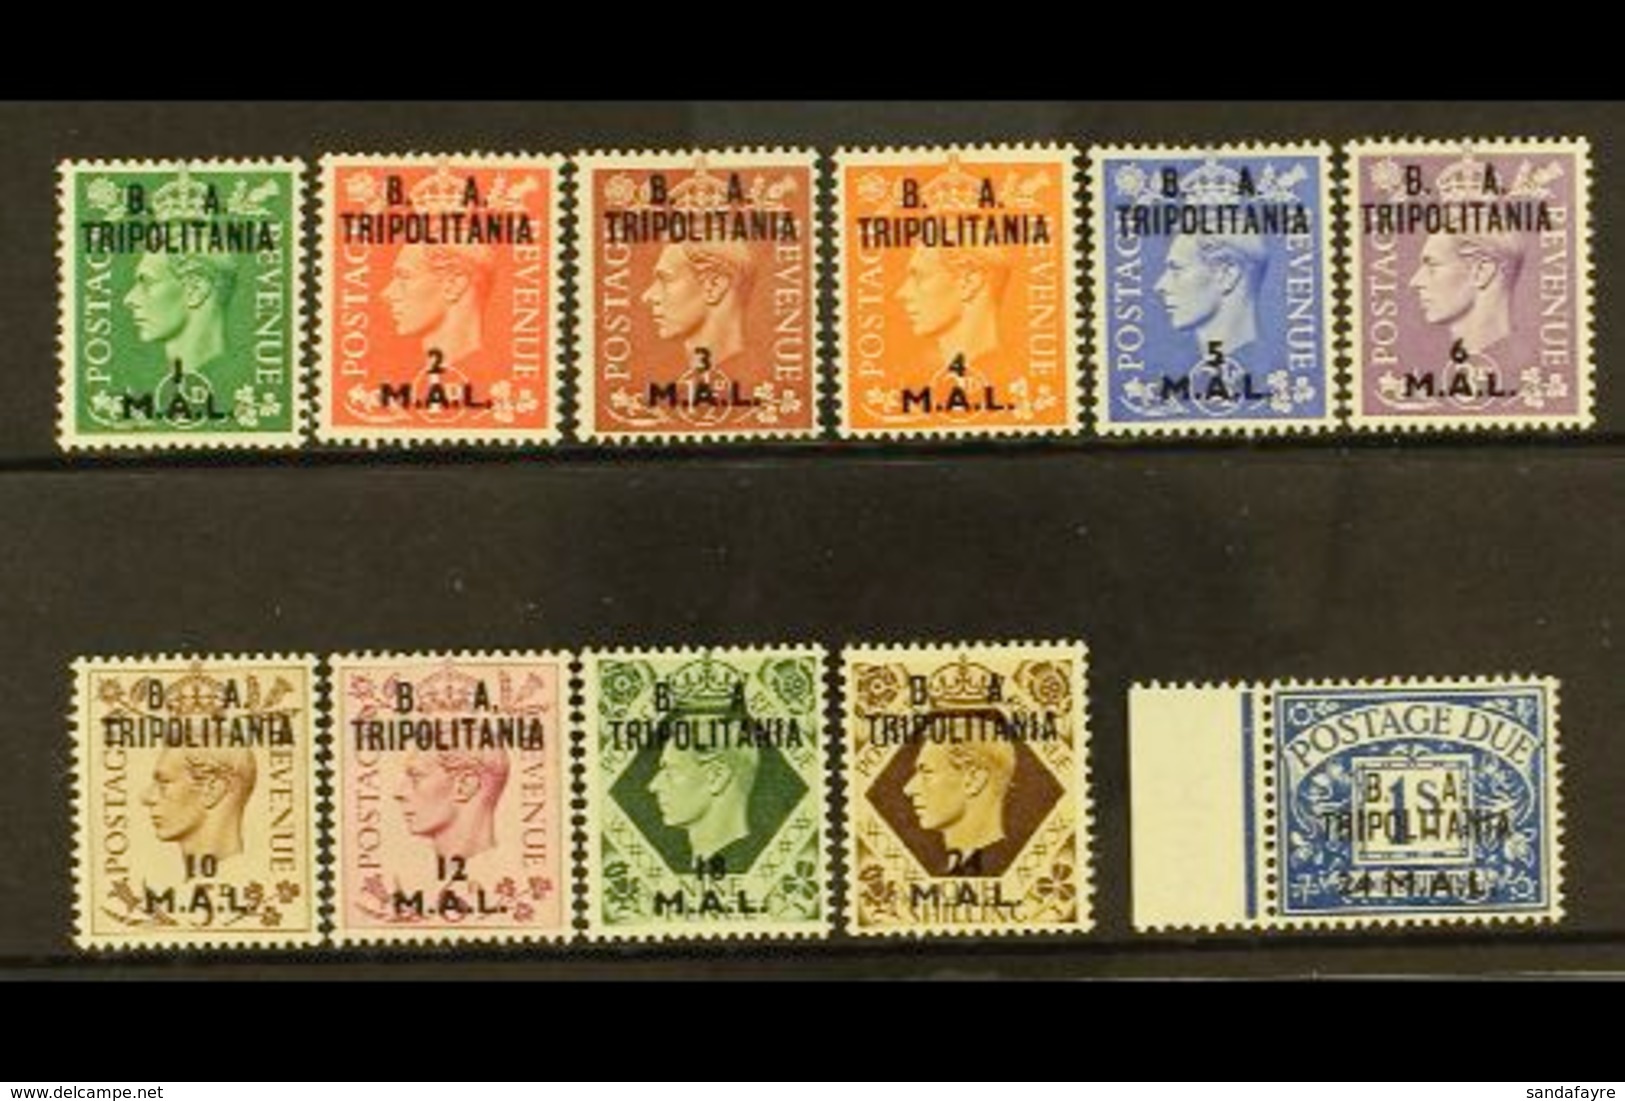 TRIPOLITANIA 1950 "B.A." Set To 24L On 1s (SG T14/23), Plus 24L On 1s Postage Due (SG TD10), Very Fine Mint. (11 Stamps) - Italian Eastern Africa